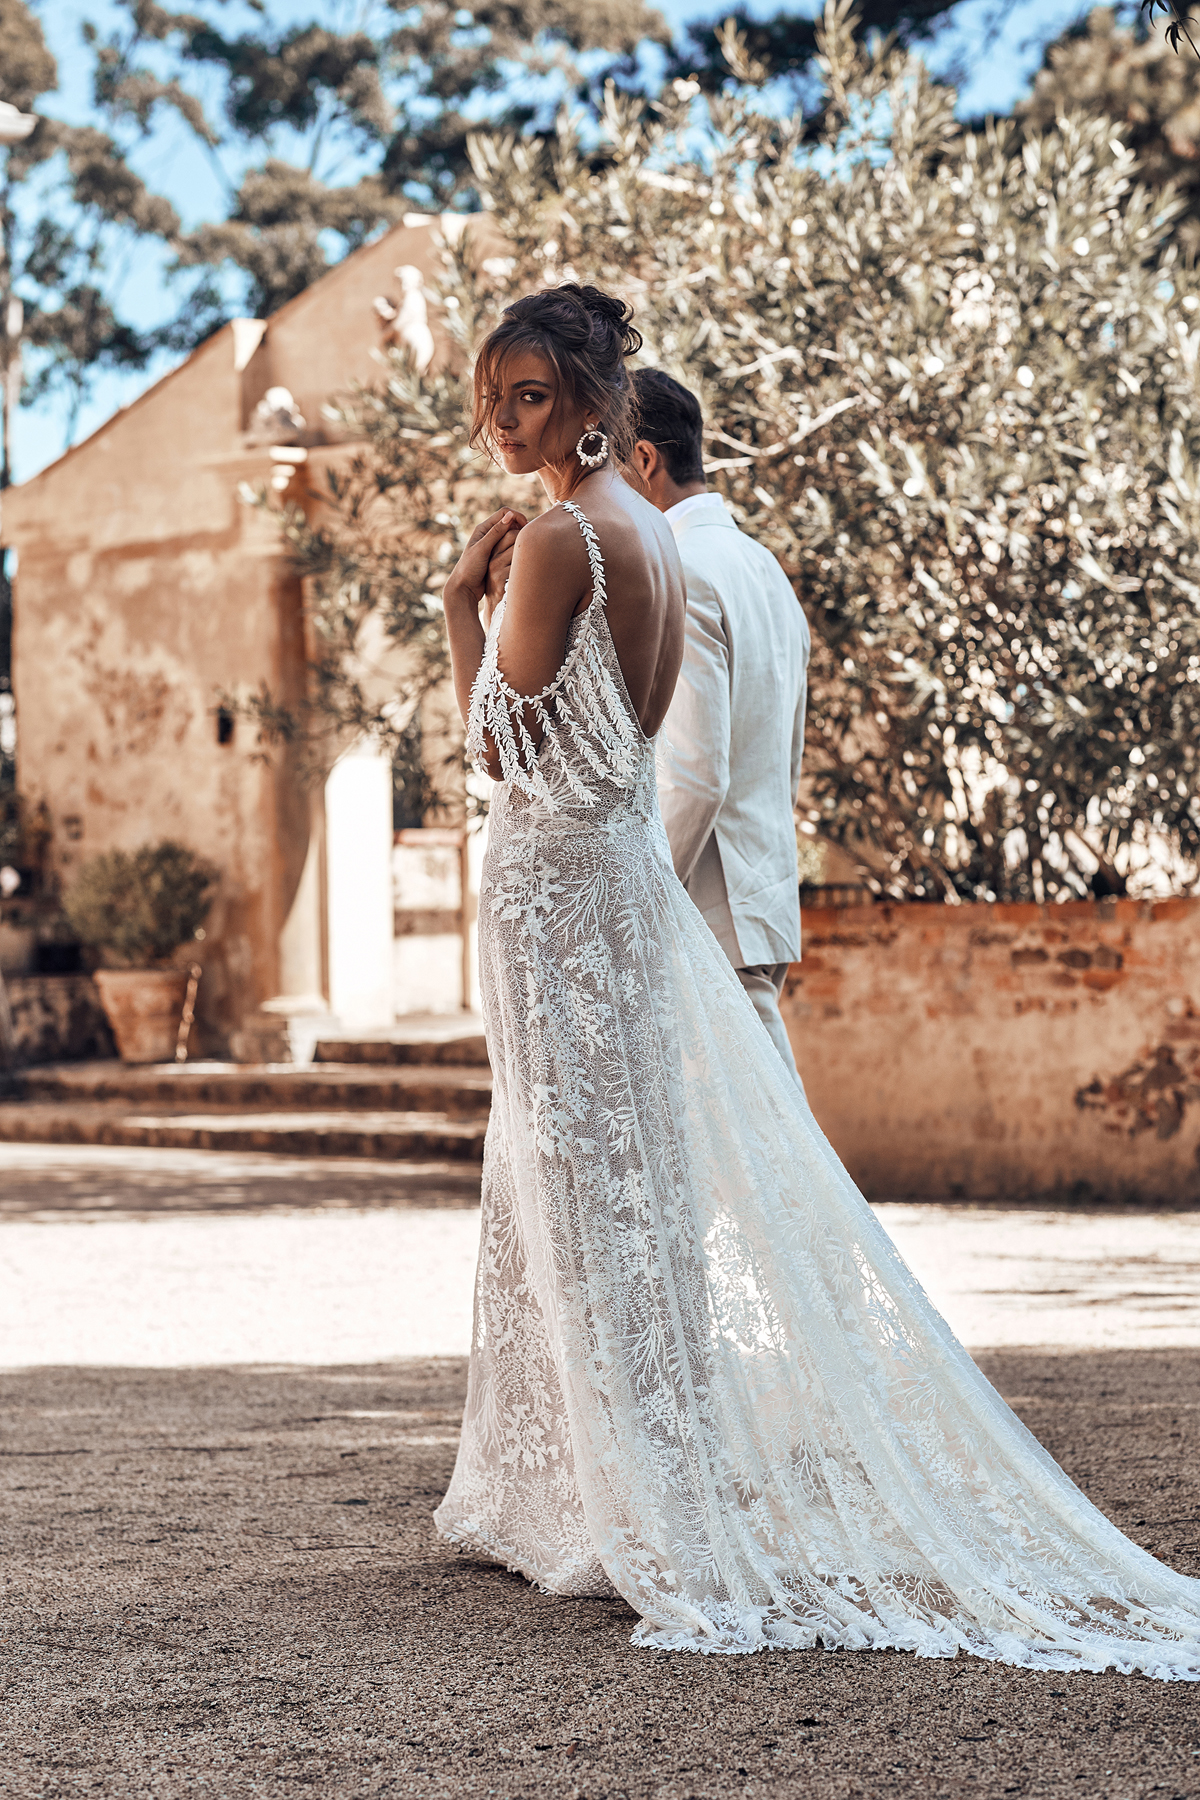 The Sol gown